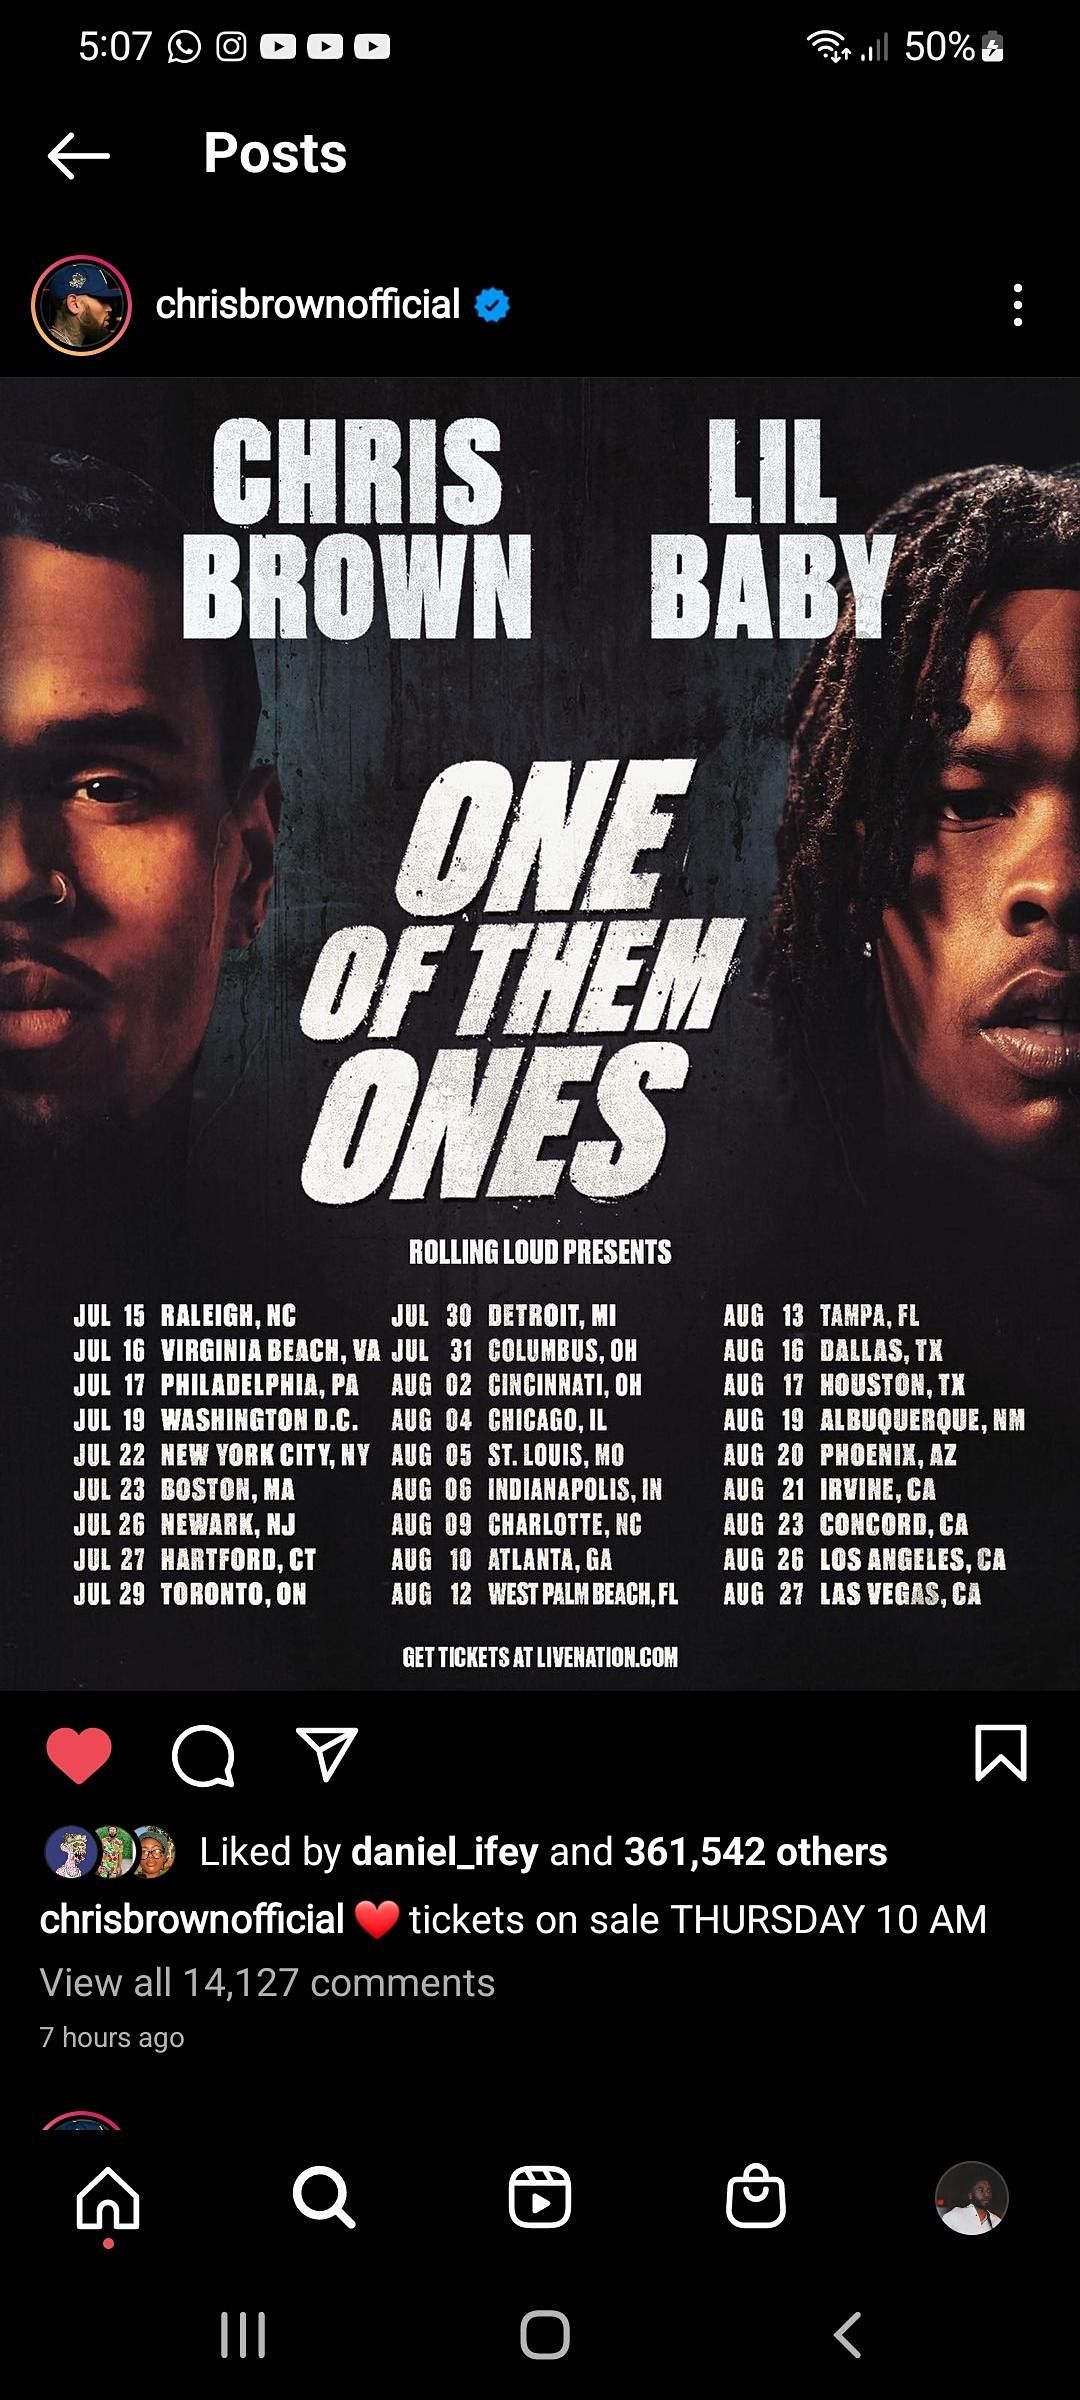 Chris Brown X lil Baby one of those ones tour New York